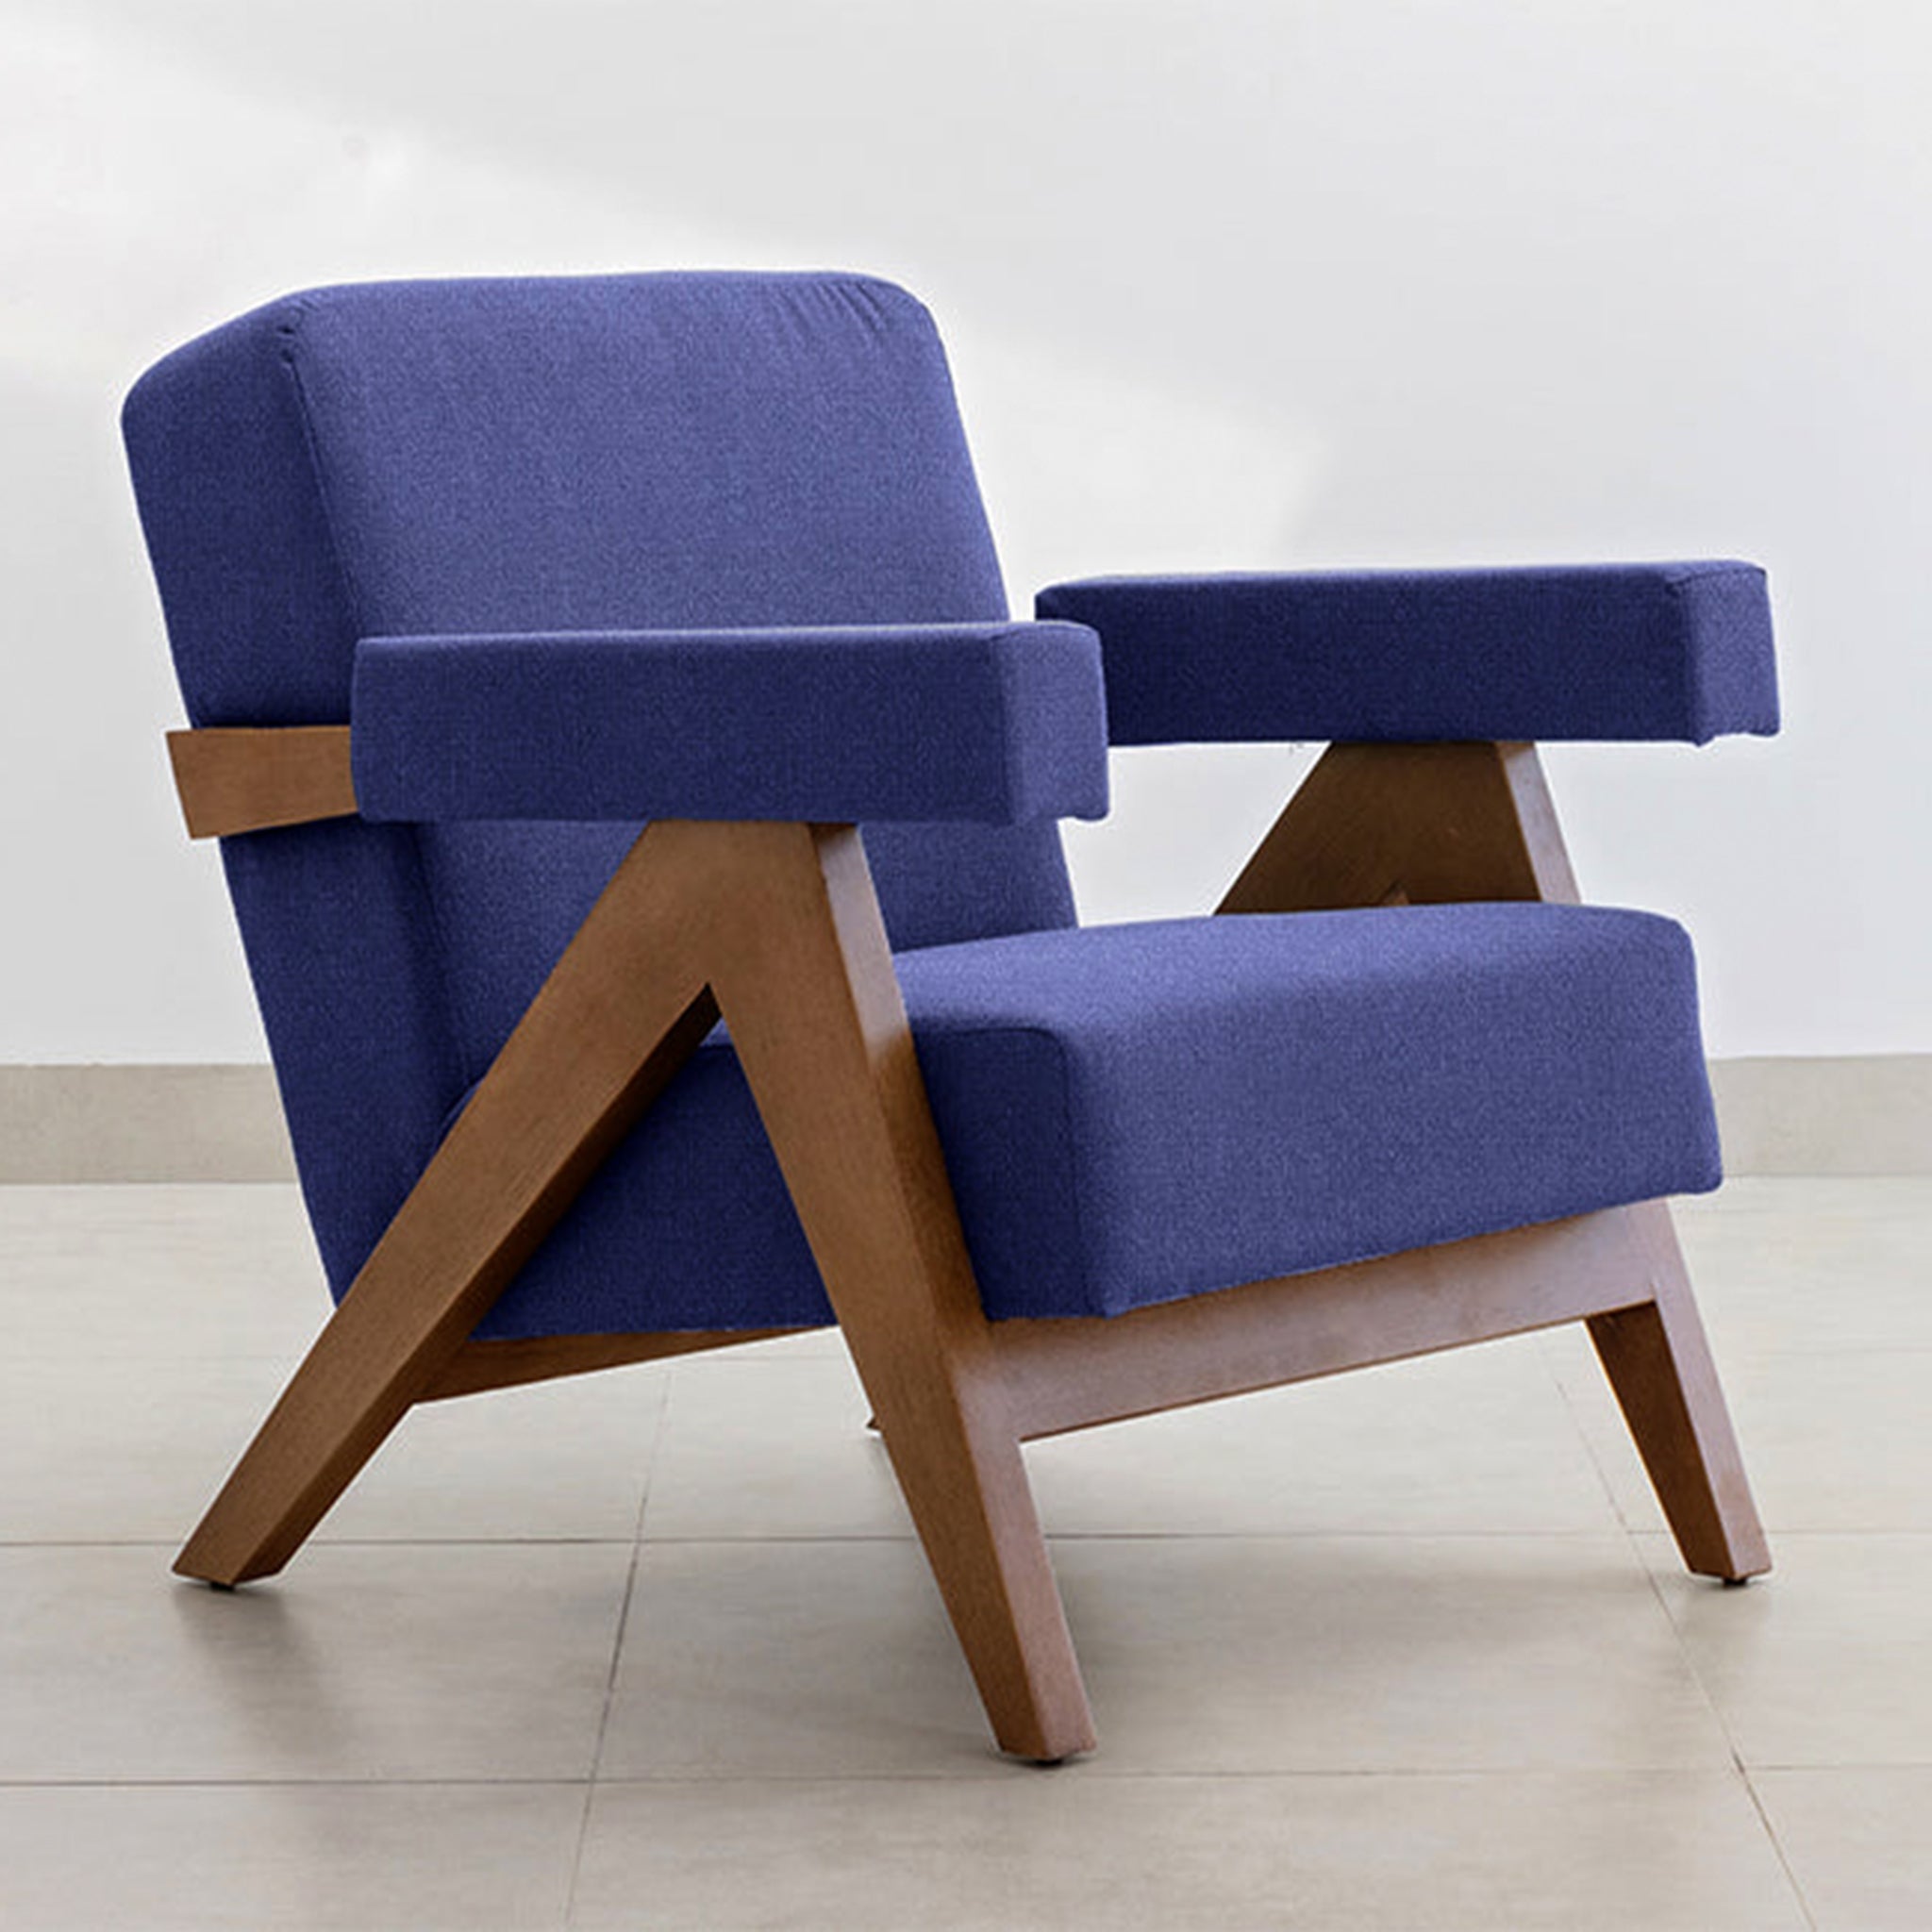 "The Pierre Accent Chair, perfect for stylish living spaces."